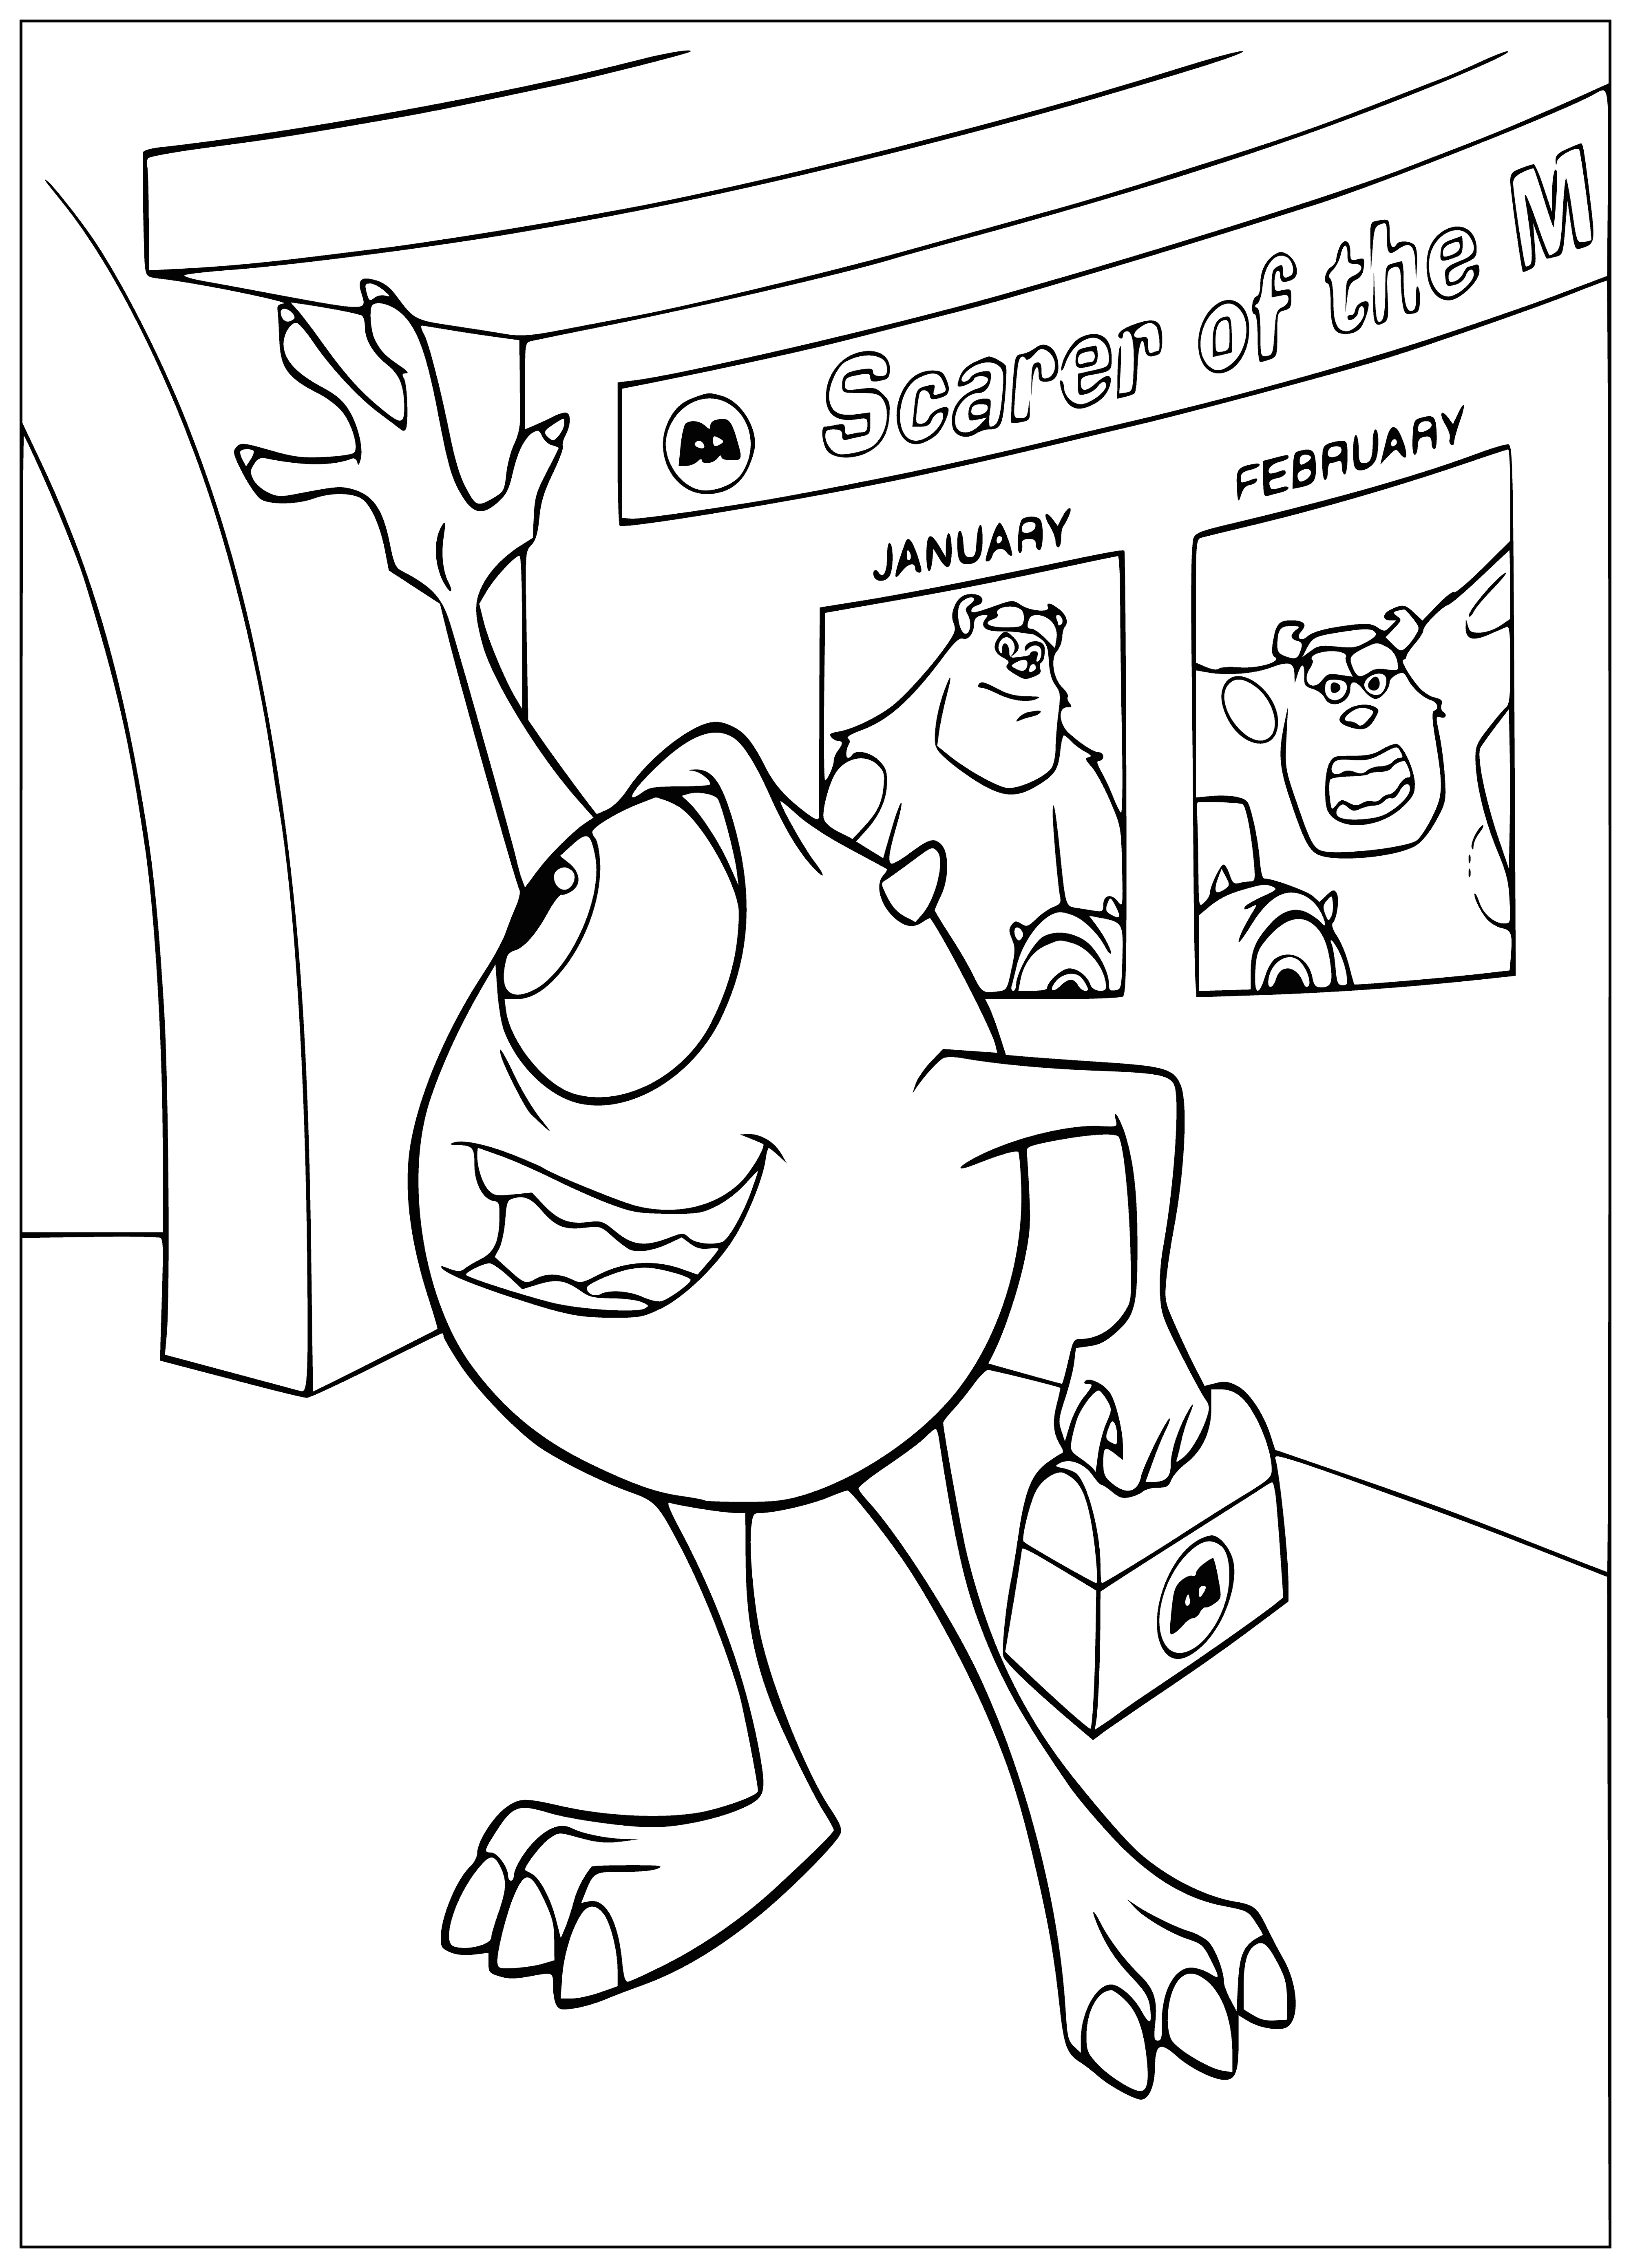 coloring page: A big green monster with purple hair, blue shirt & red suspenders, holds a mic & looks at you from the center of the page.